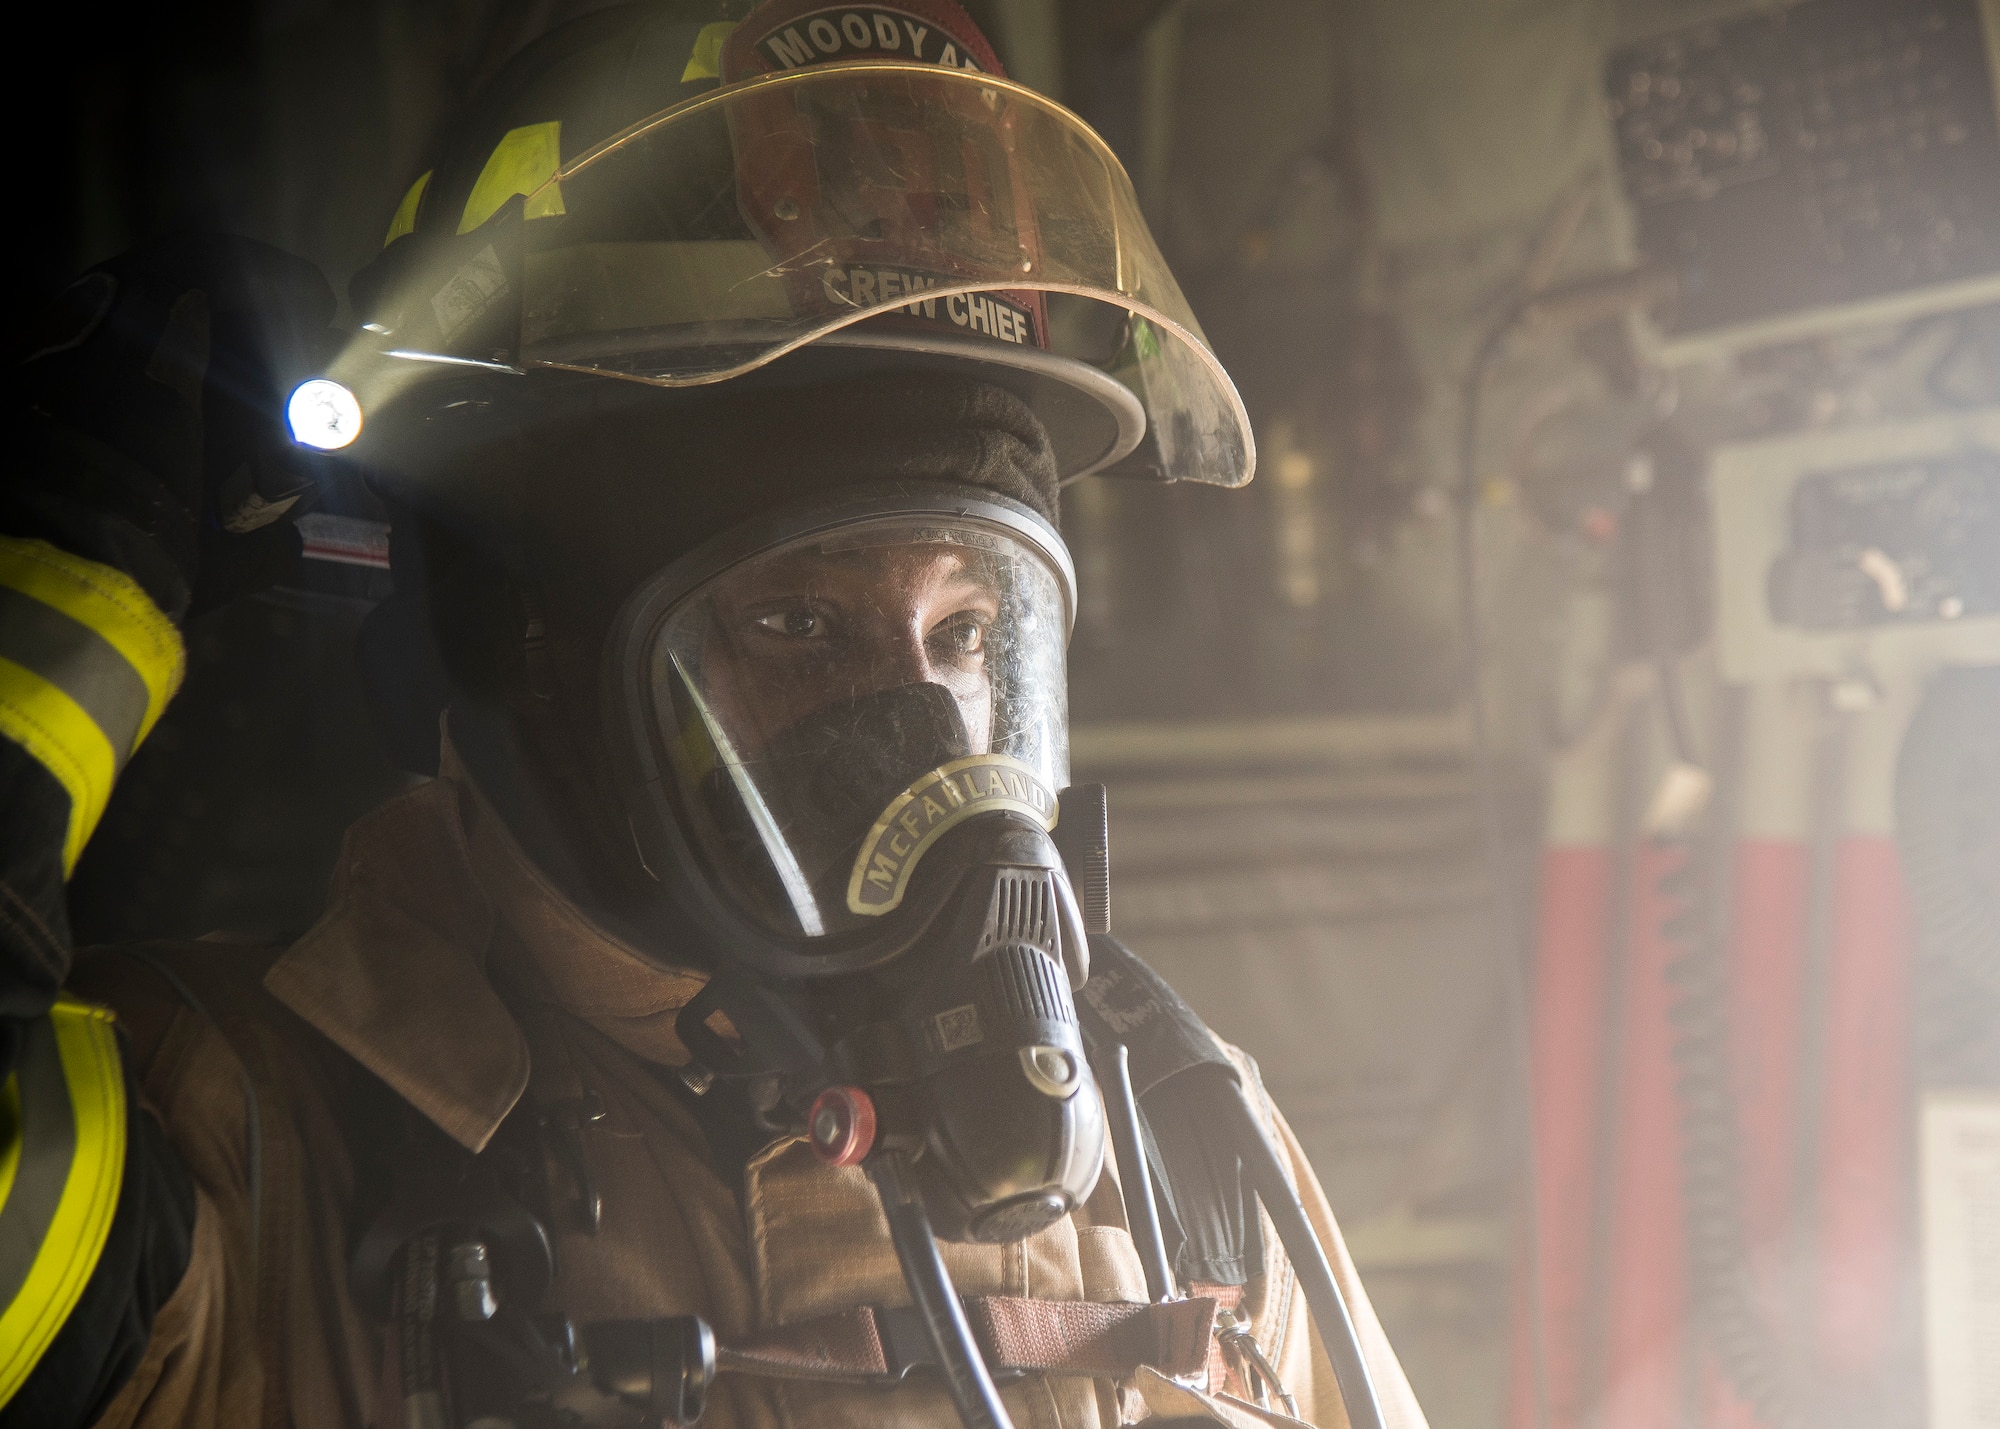 Staff Sgt. Tyler McFarland, 23d Civil Engineer Squadron (CES) firefighter crew chief, searches for personnel to rescue during HC-130J Combat King II egress training, July 11, 2019, at Moody Air Force Base, Ga. Firefighters conducted the training to evaluate their overall knowledge and proficiency of how to properly shut down and rescue personnel from a C-130 during an emergency situation. The training required the firefighters to properly enter and ventilate the aircraft while conducting swift rescue techniques to safely locate and remove passengers from the aircraft. (U.S. Air Force photo by Airman 1st Class Eugene Oliver)